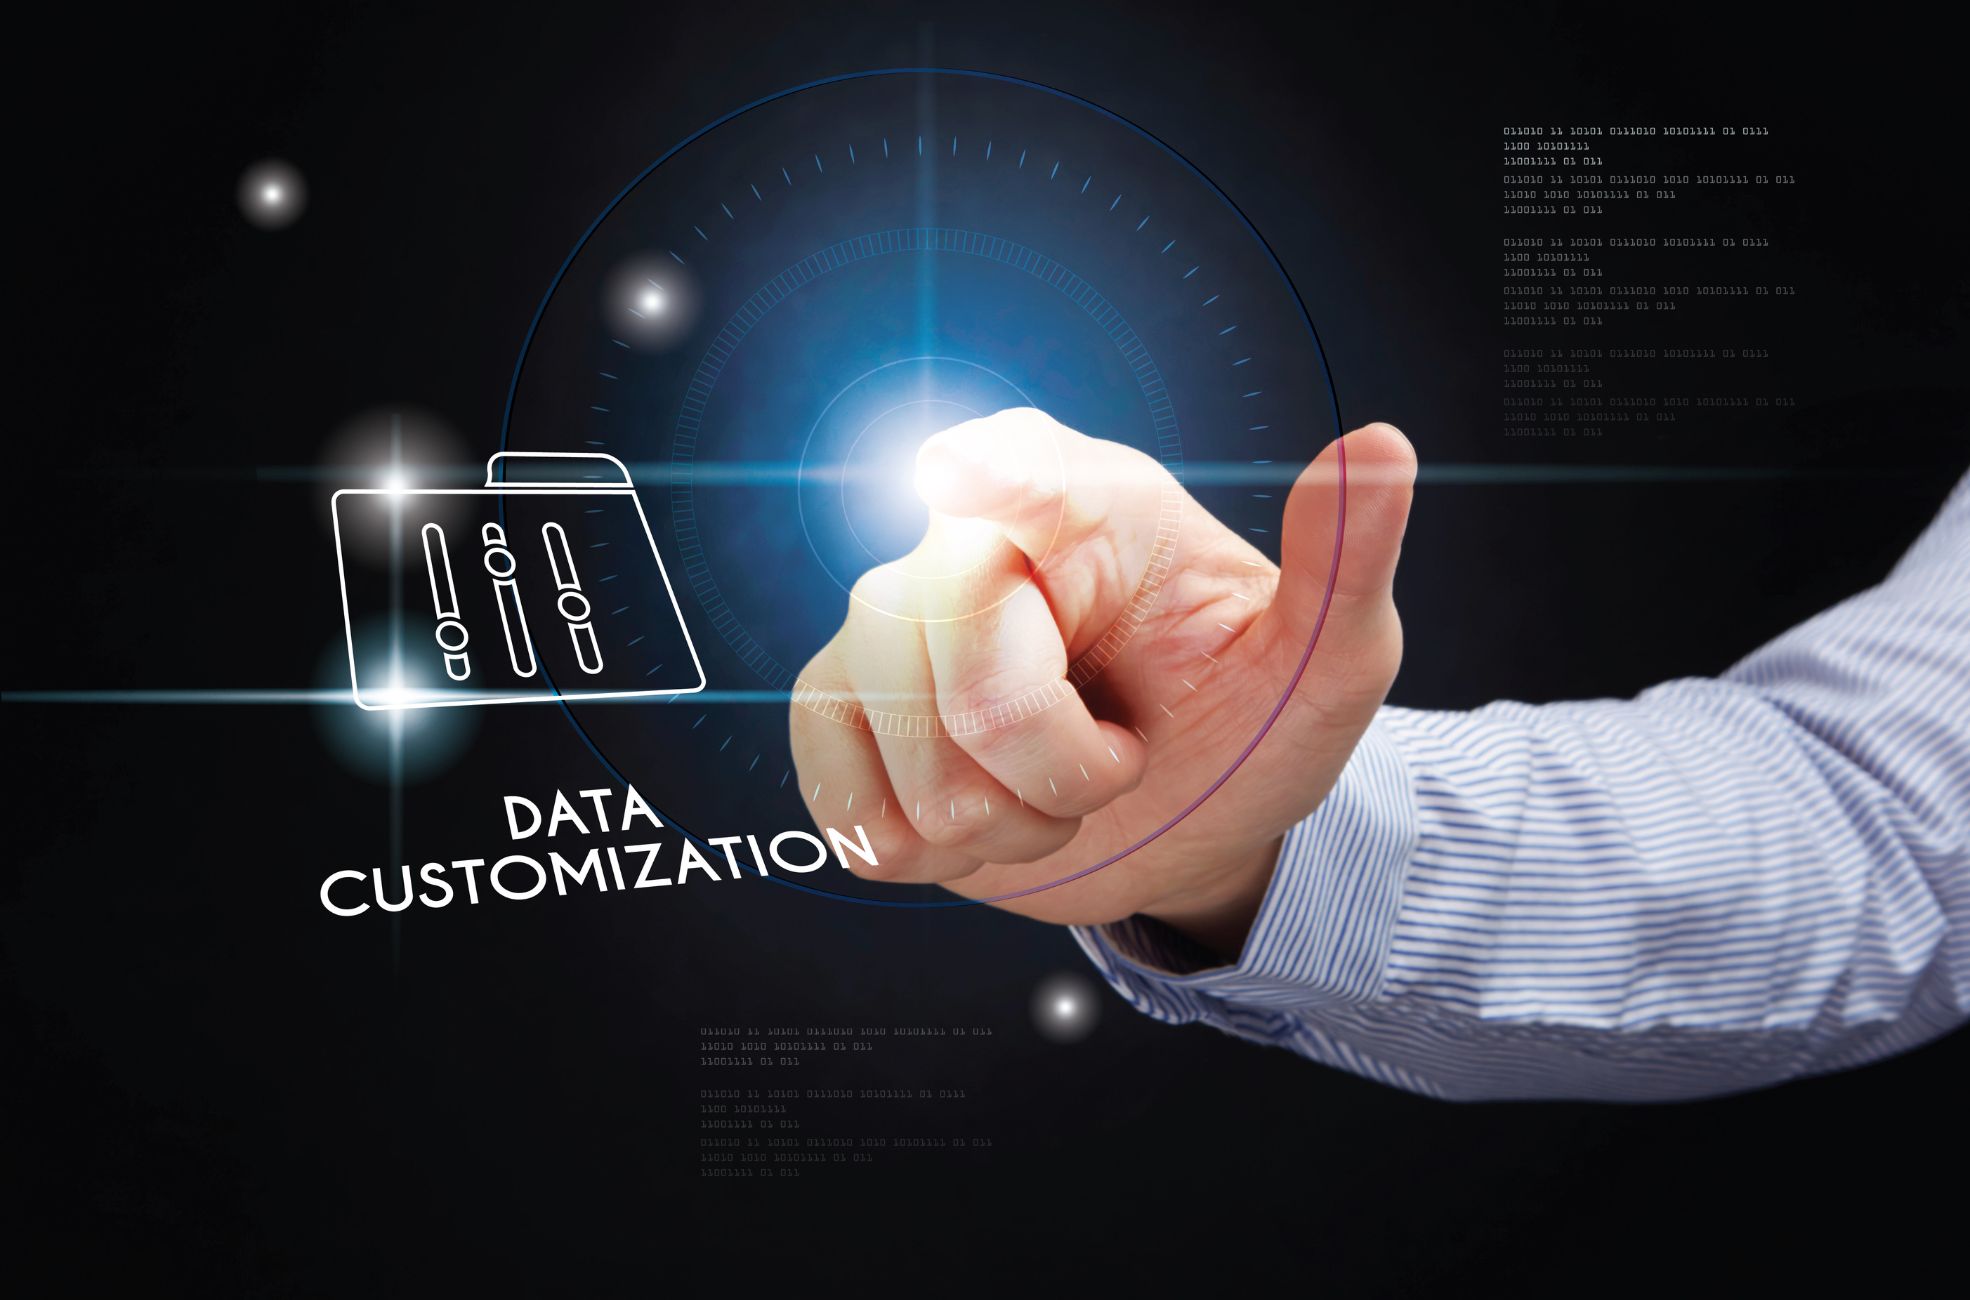 Stock Photo Showing Finger Pointing At Data Customisation aAnd Personalisation